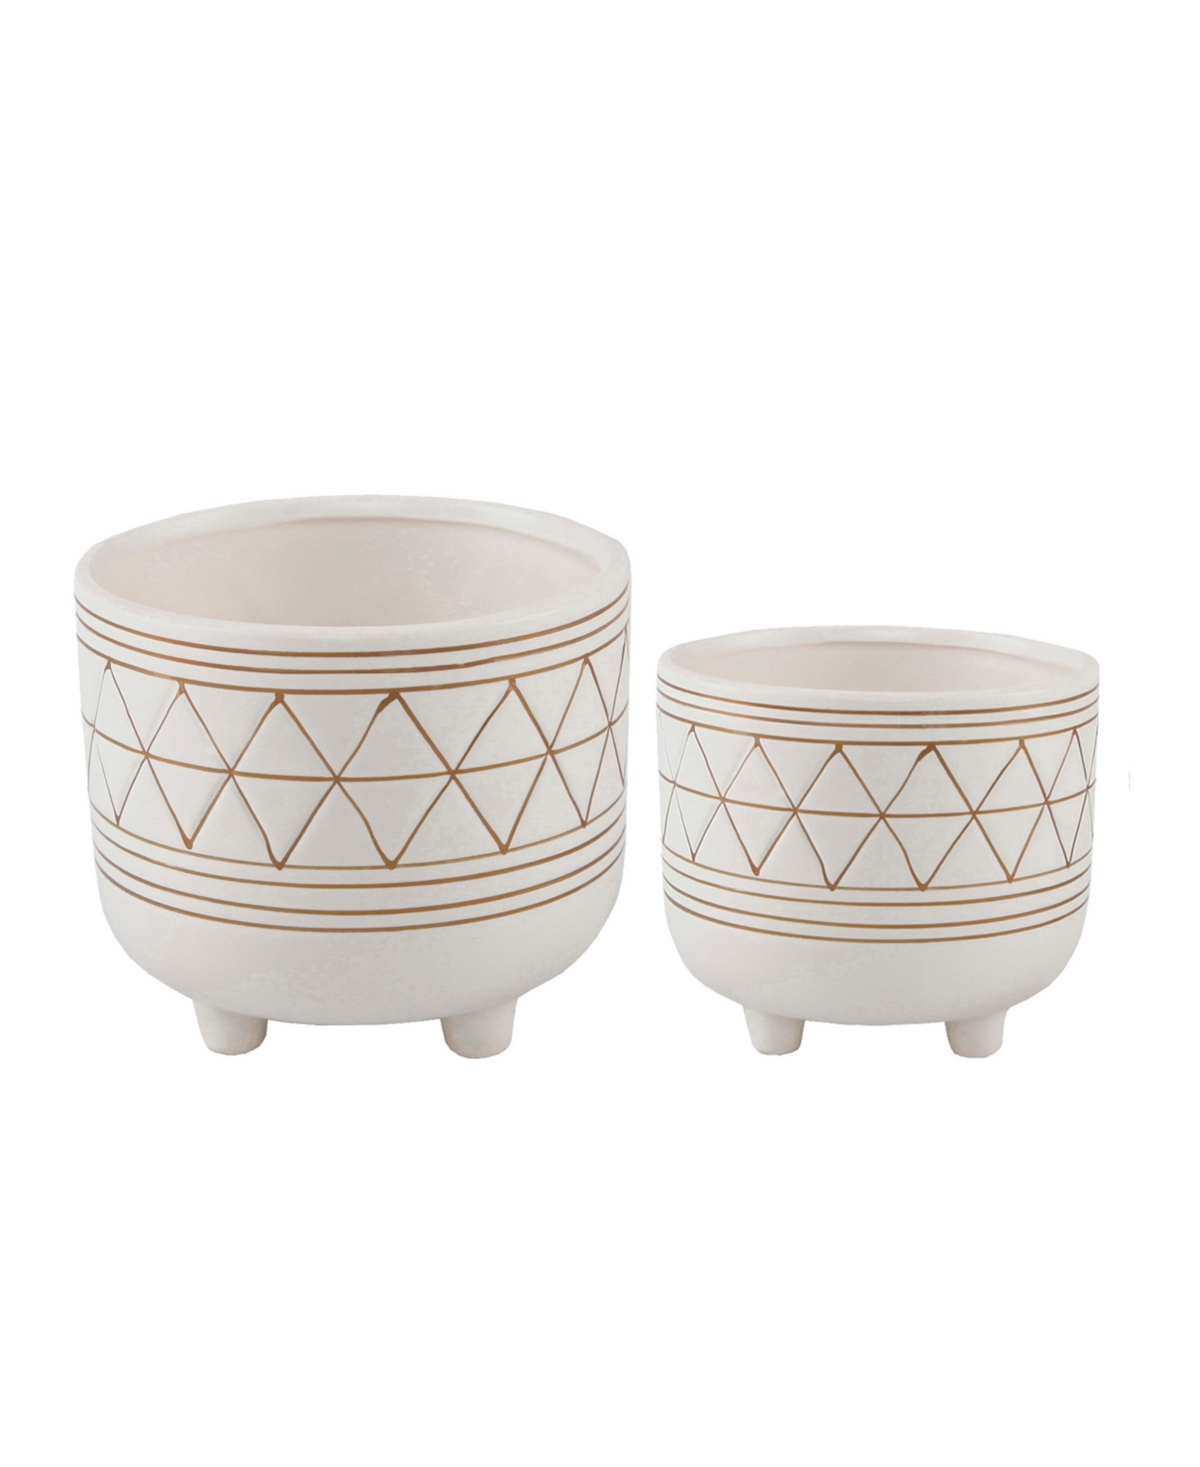 Geo Ceramic Planter with Legs, Set of 2 - White and Gold-Tone